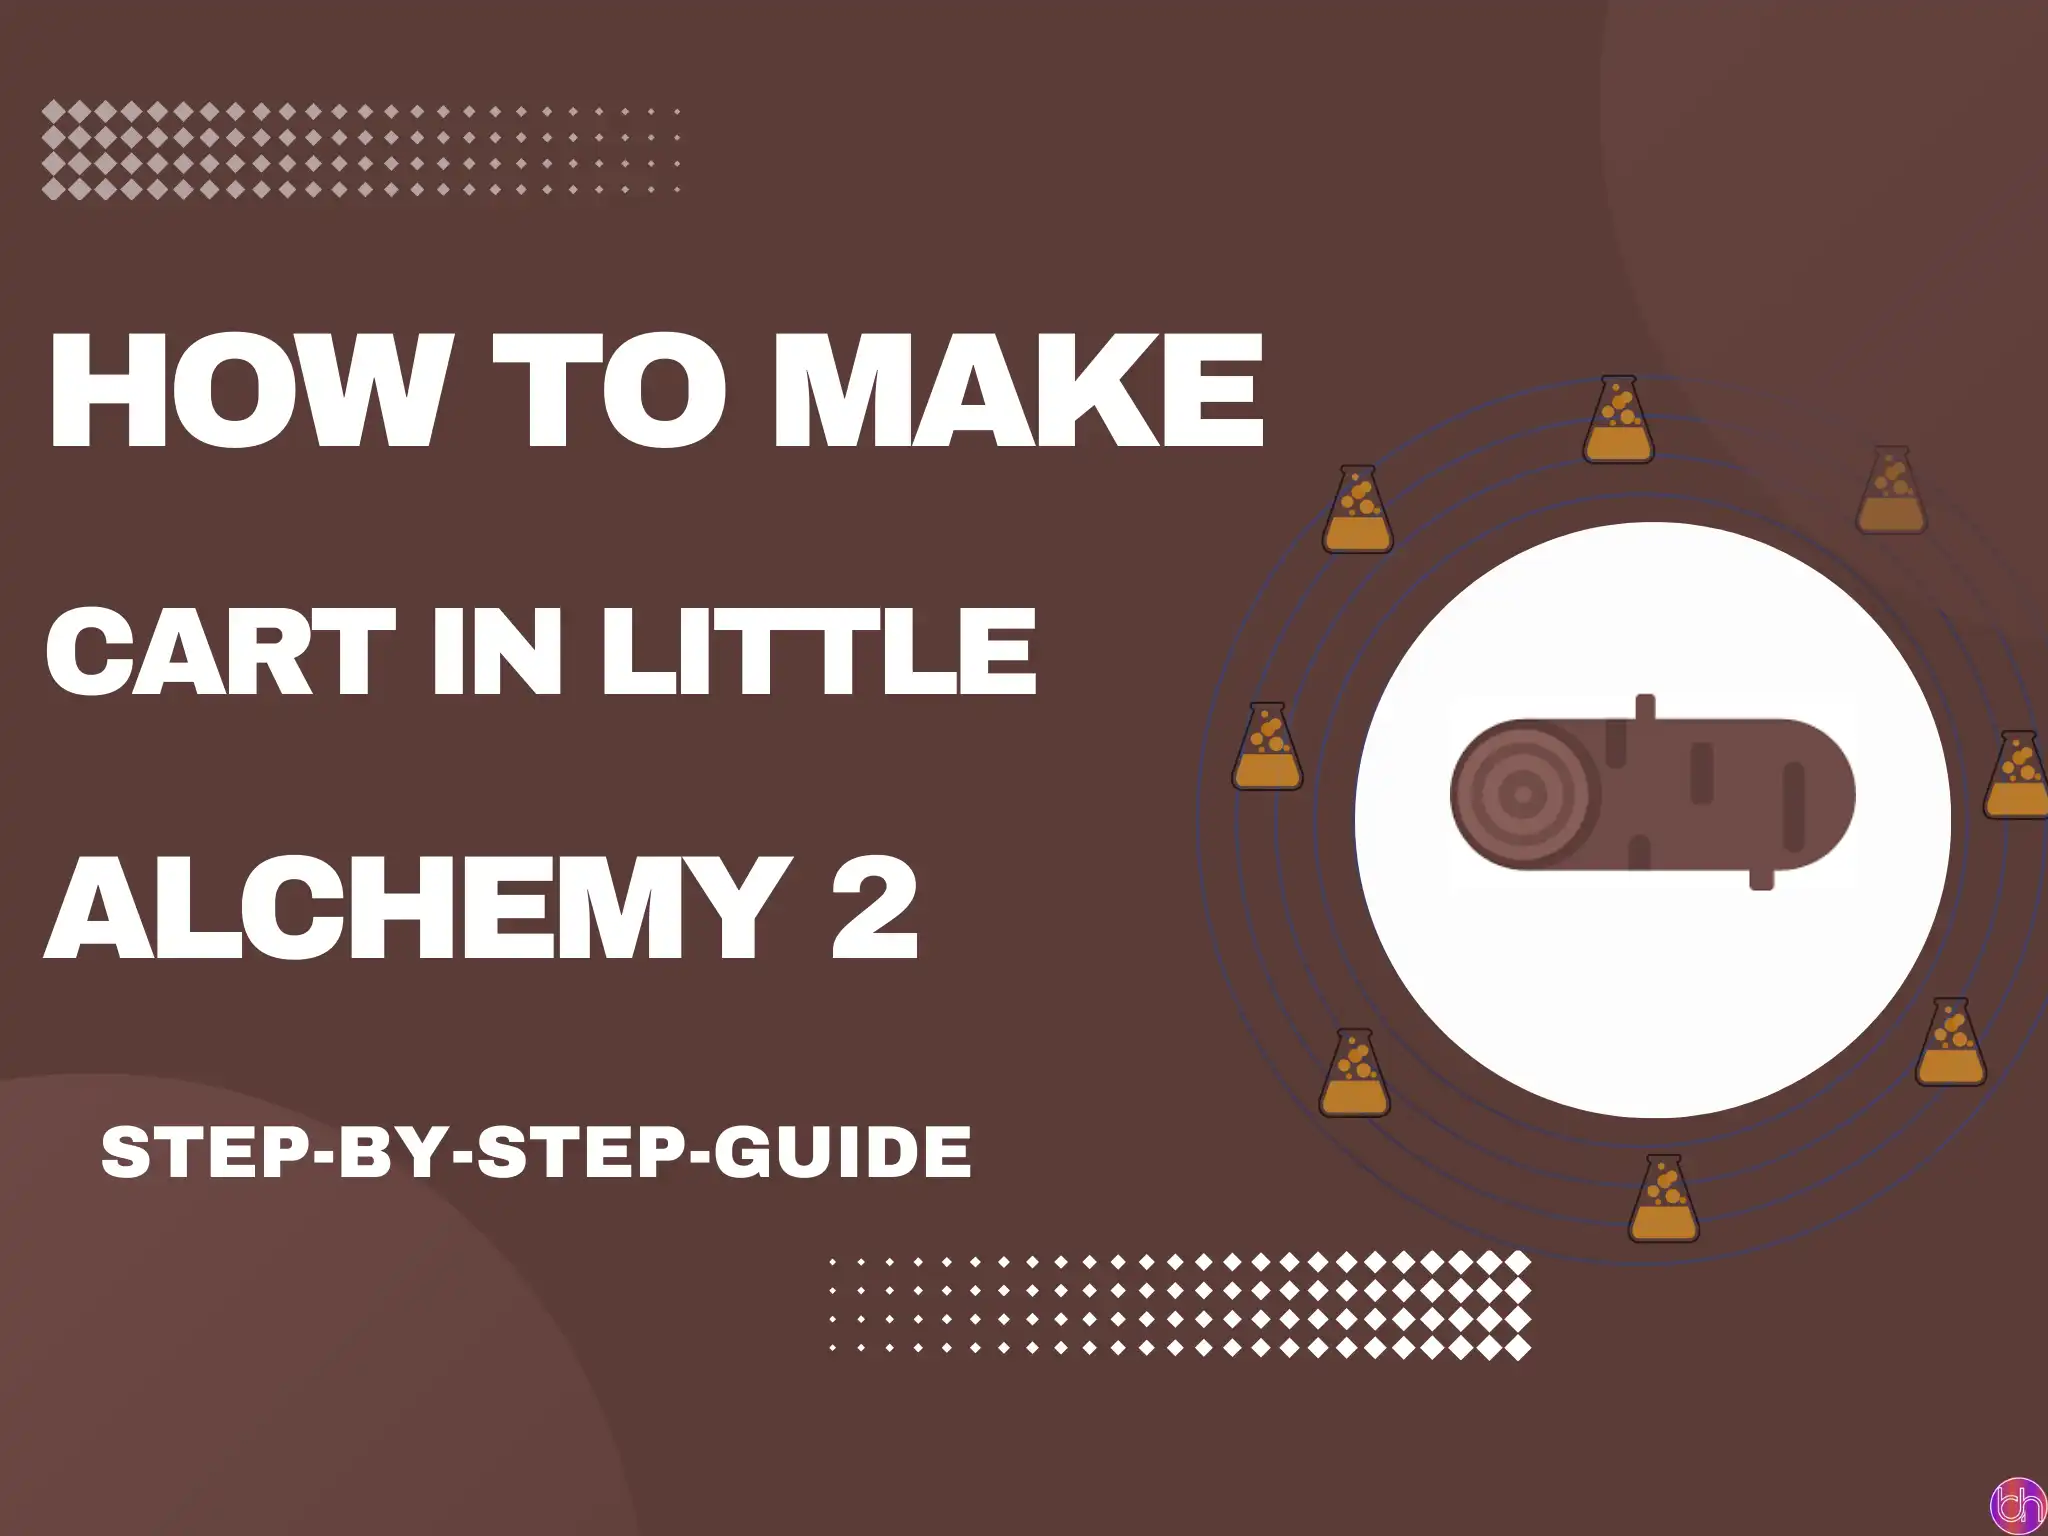 How to make Cart in little alchemy 2